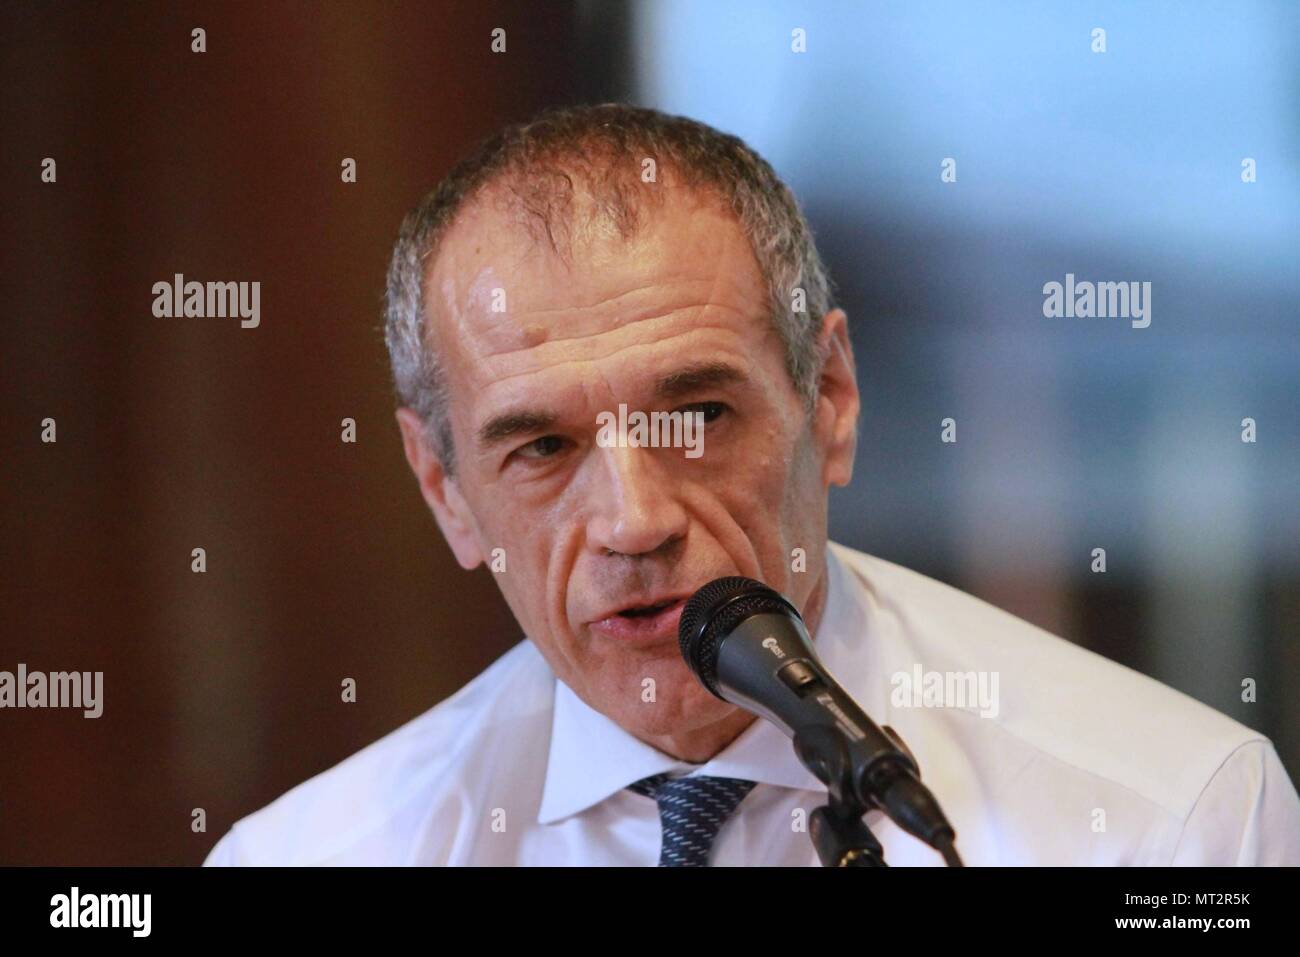 DEBATE ON PUBLIC DEBT IN STATALE WITH CARLO COTTARELLI (Alberto Cattaneo, MILAN - 2018-05-02) ps the photo can be used respecting the context in which it was taken, and without the defamatory intent of the people represented (Alberto Cattaneo, PHOTO ARCHIVE - 2018-05-28) ps the photo can be used respecting the context in which it was taken, and without the defamatory intent of the decoration of the people represented Stock Photo